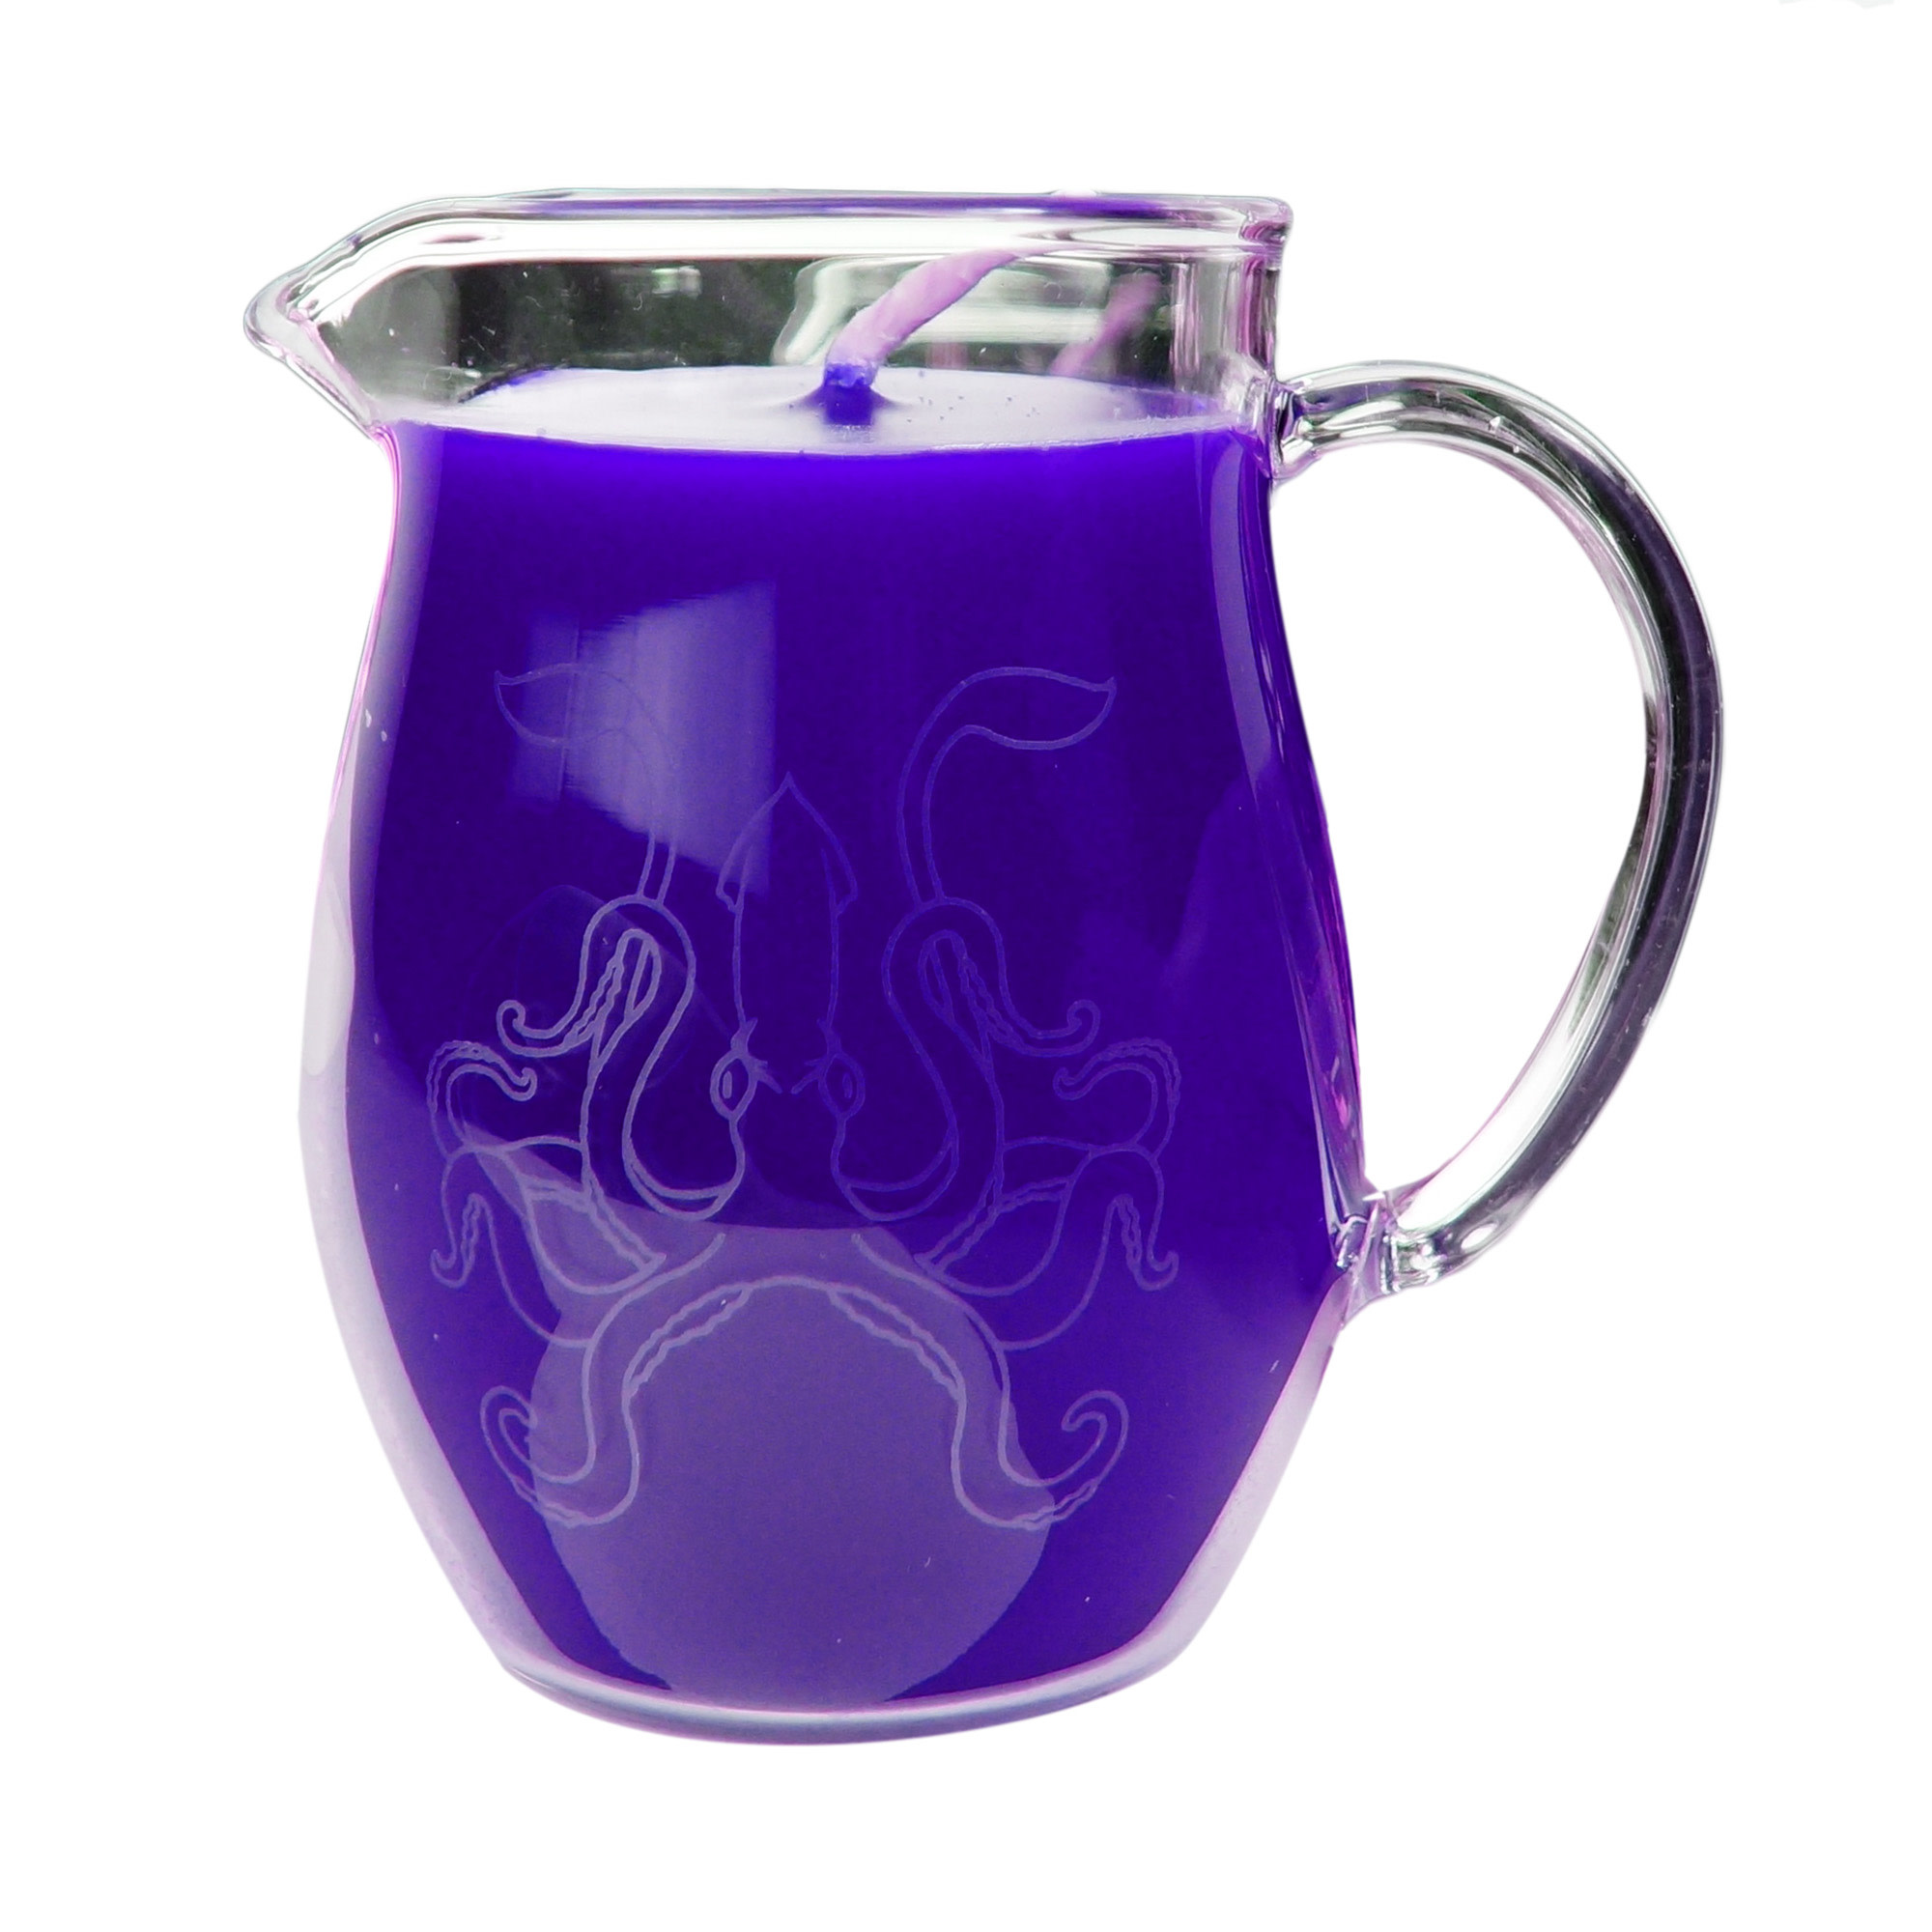 Wax Play Pitcher Candle in Purple